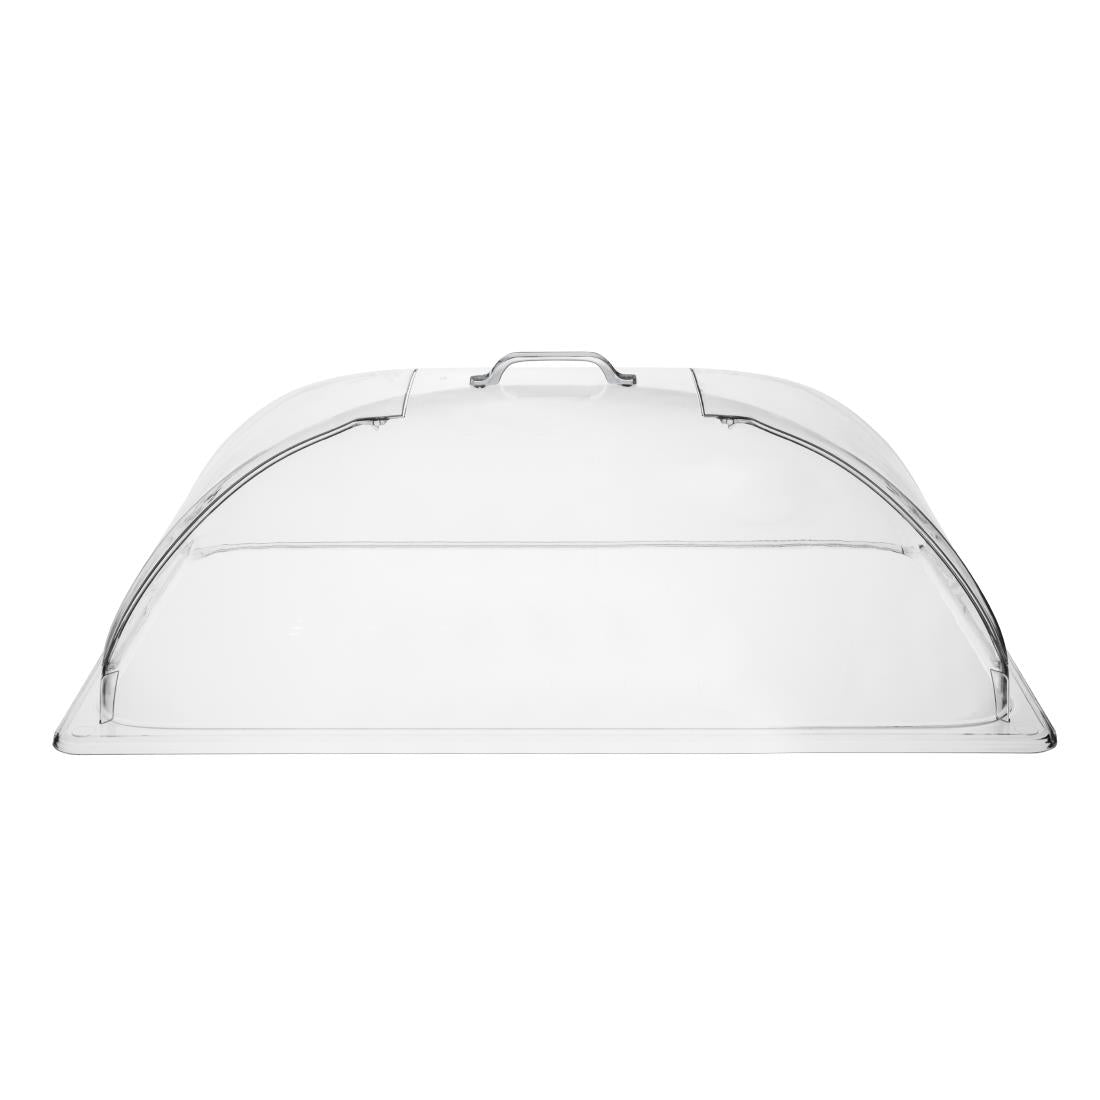 DP790 Olympia Kristallon Polycarbonate 1/1 GN Domed Cover 535x330x175mm